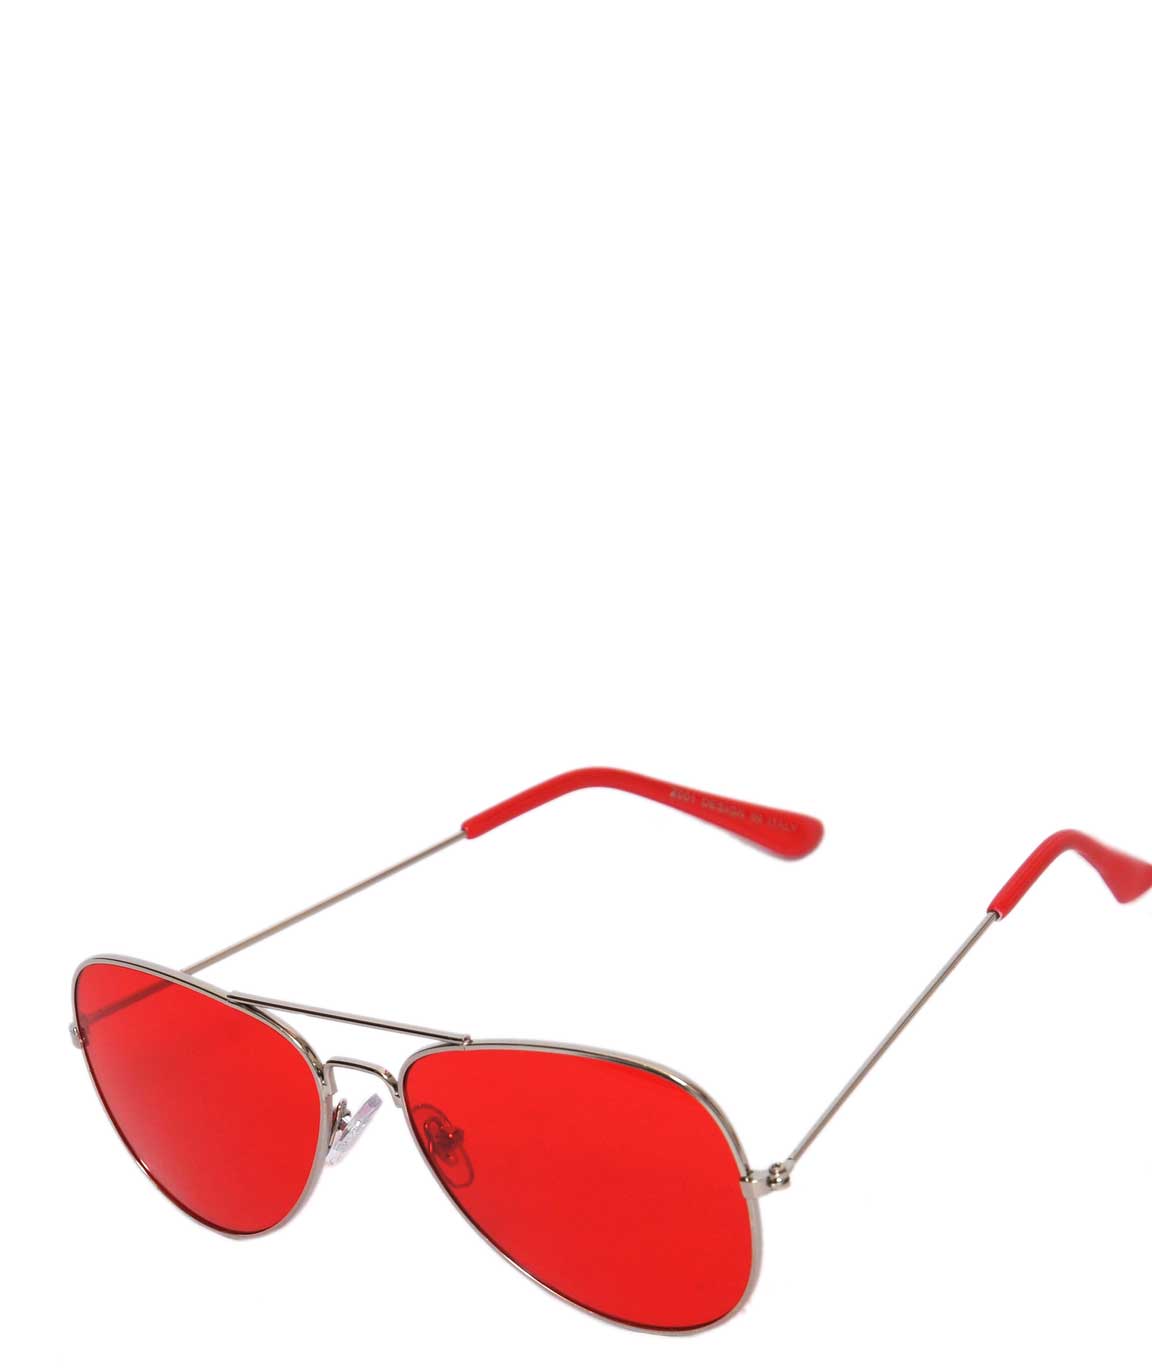 Heart Lenses red sunglasses | Moschino Official Store